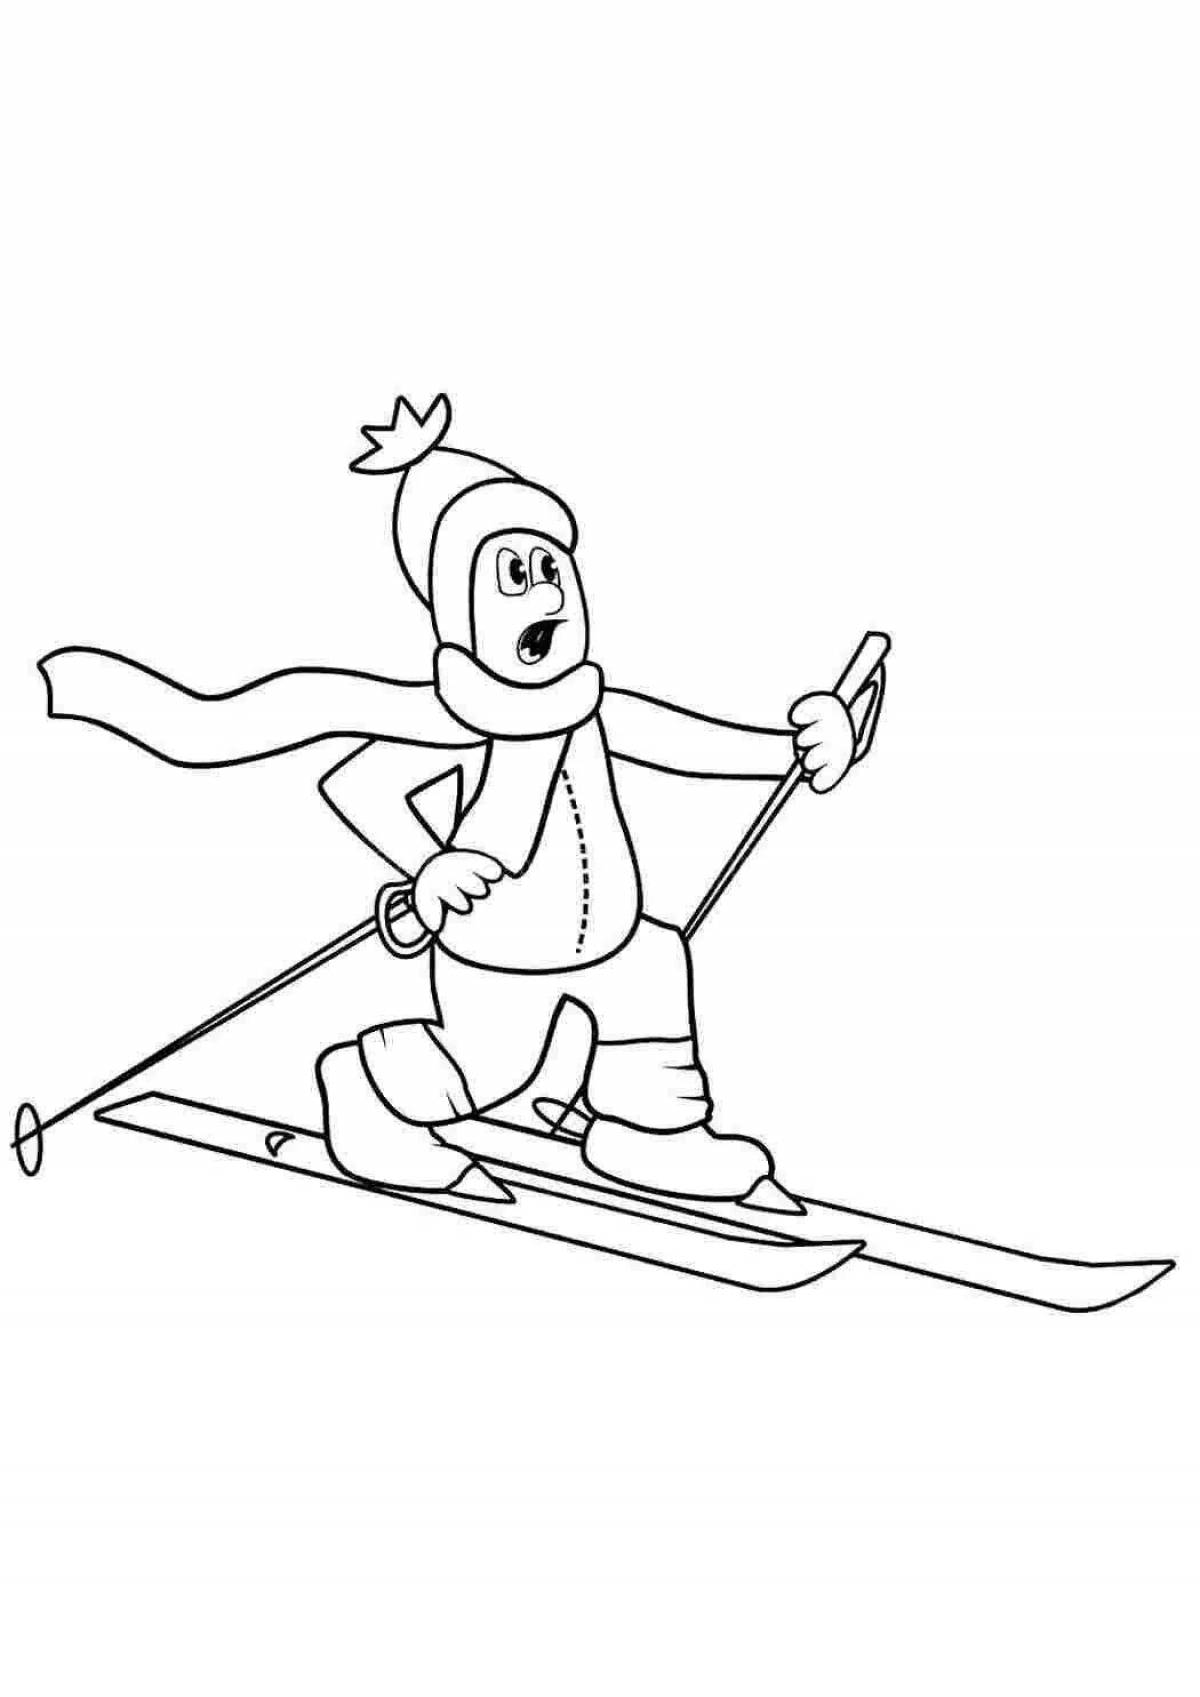 Coloring page funny ski race